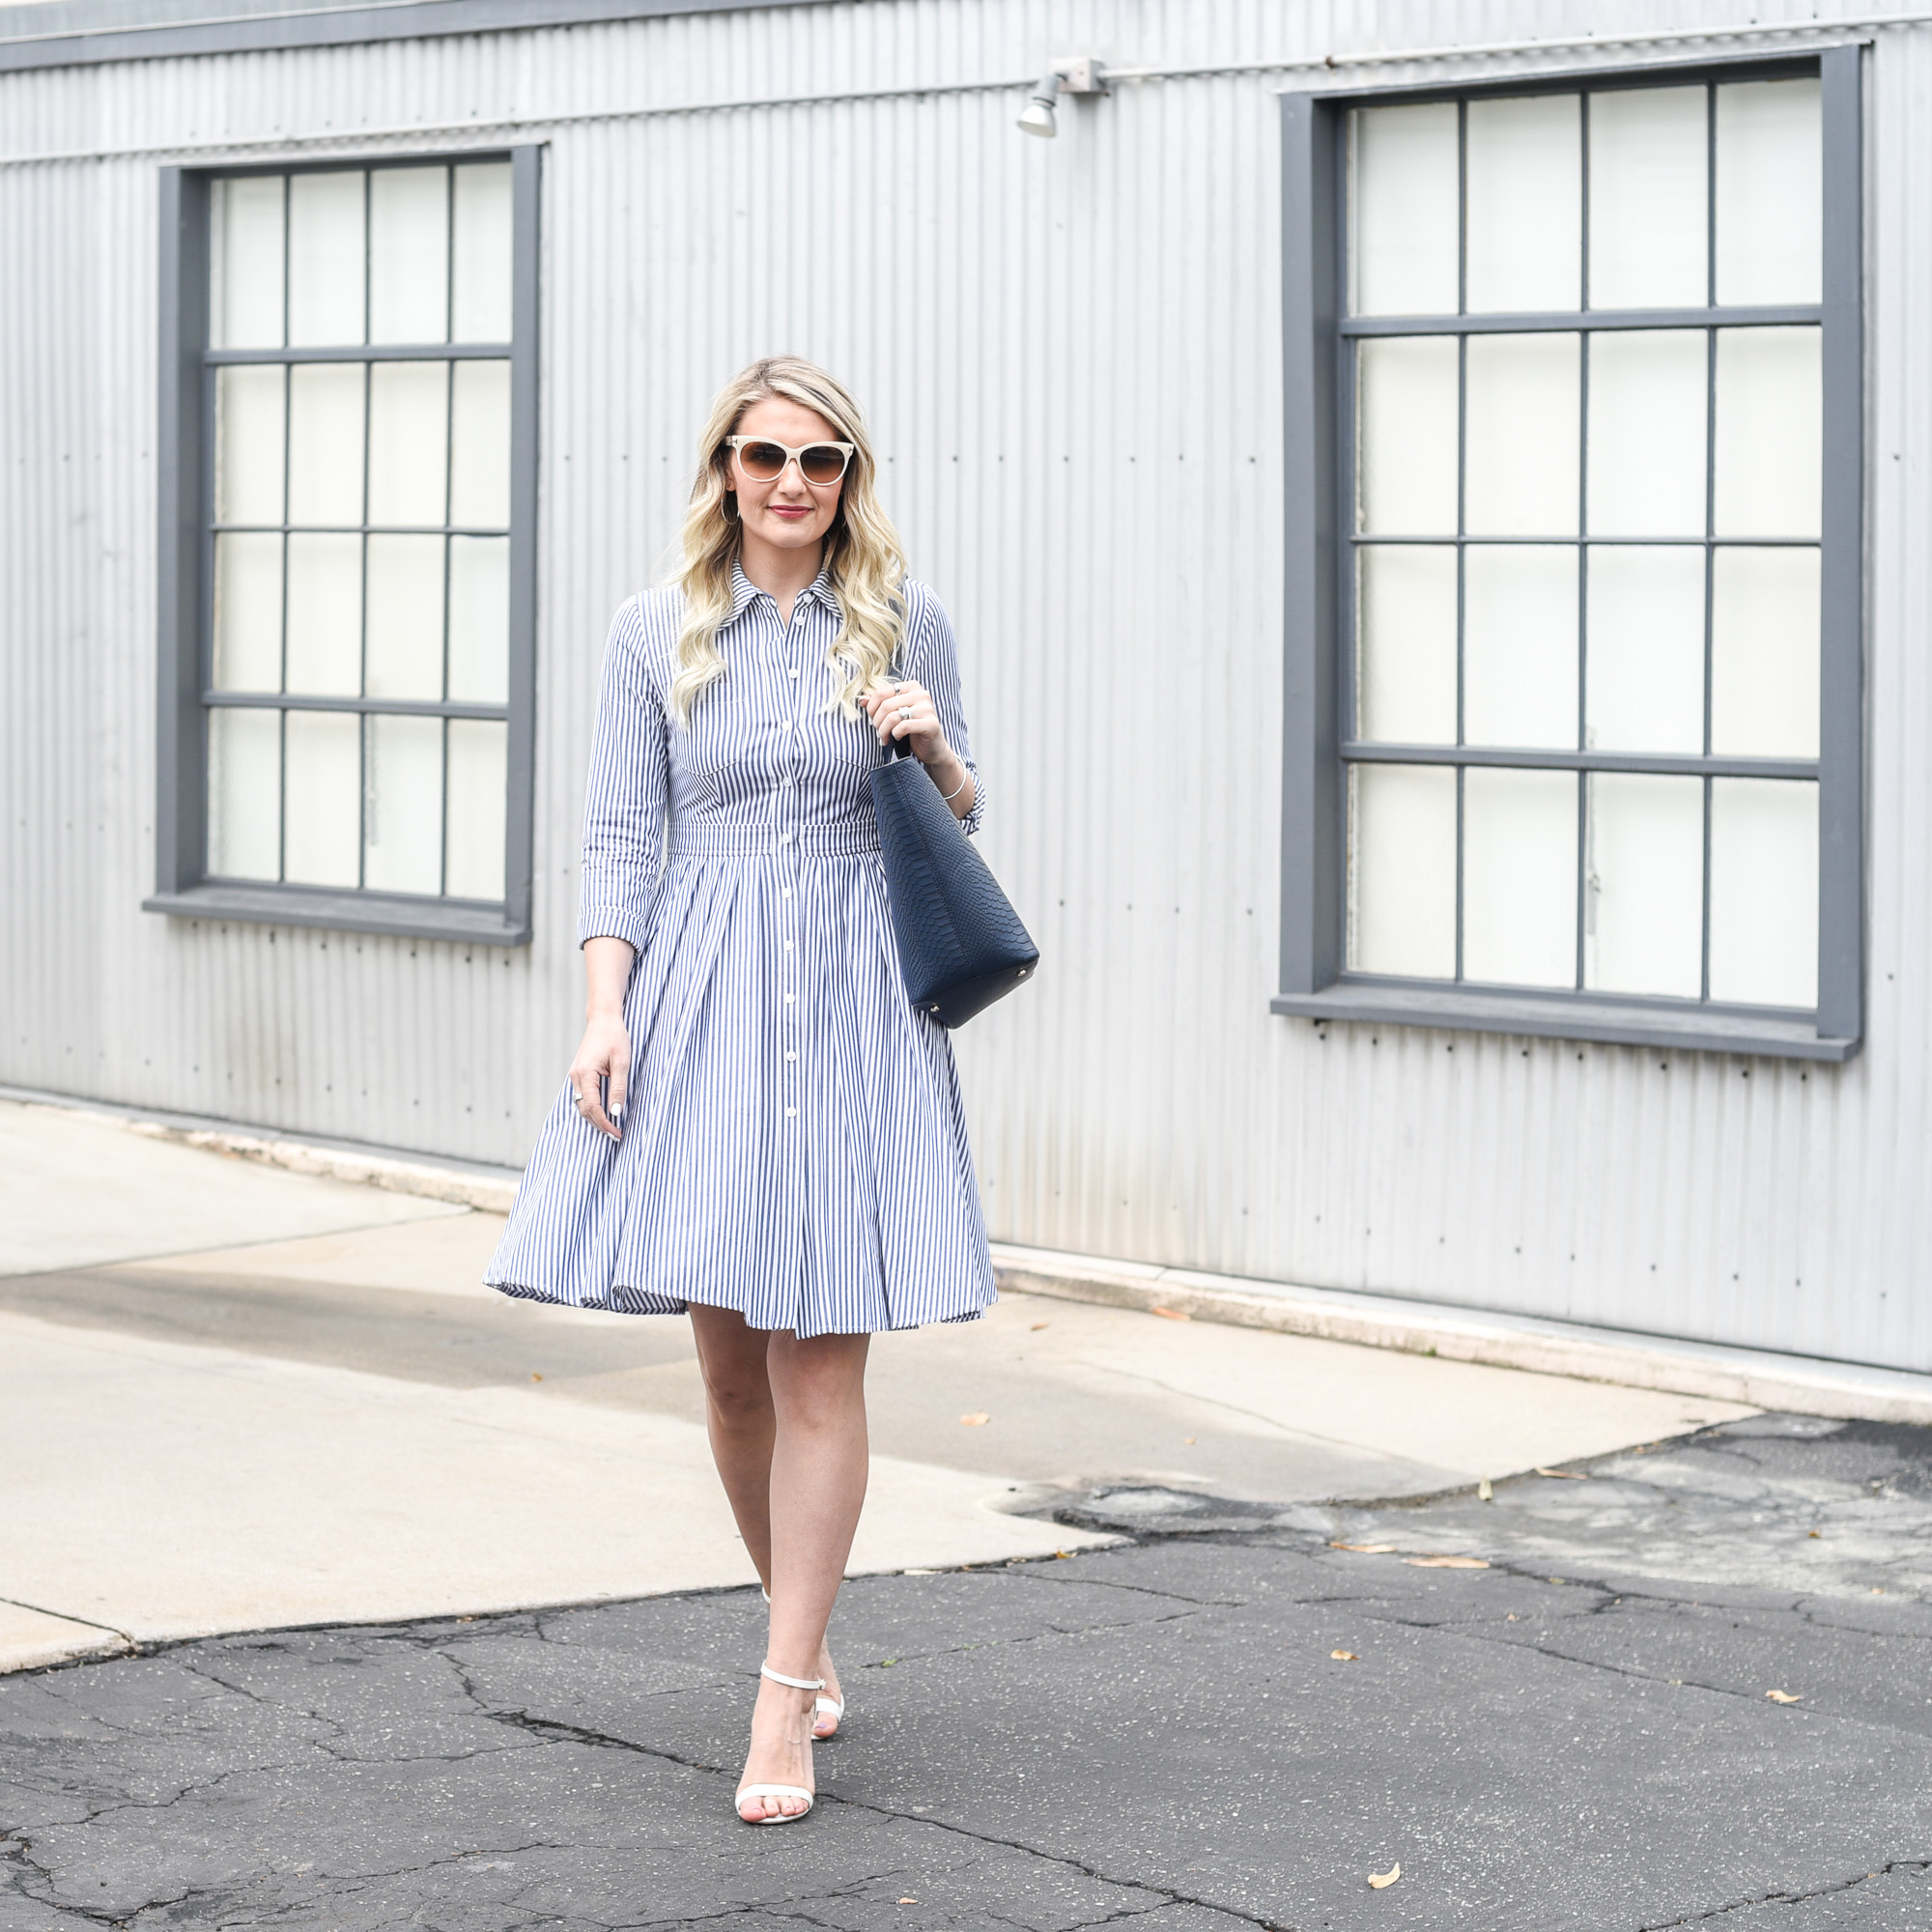 Jenna Colgrove in a striped button down dress with a navy tote.